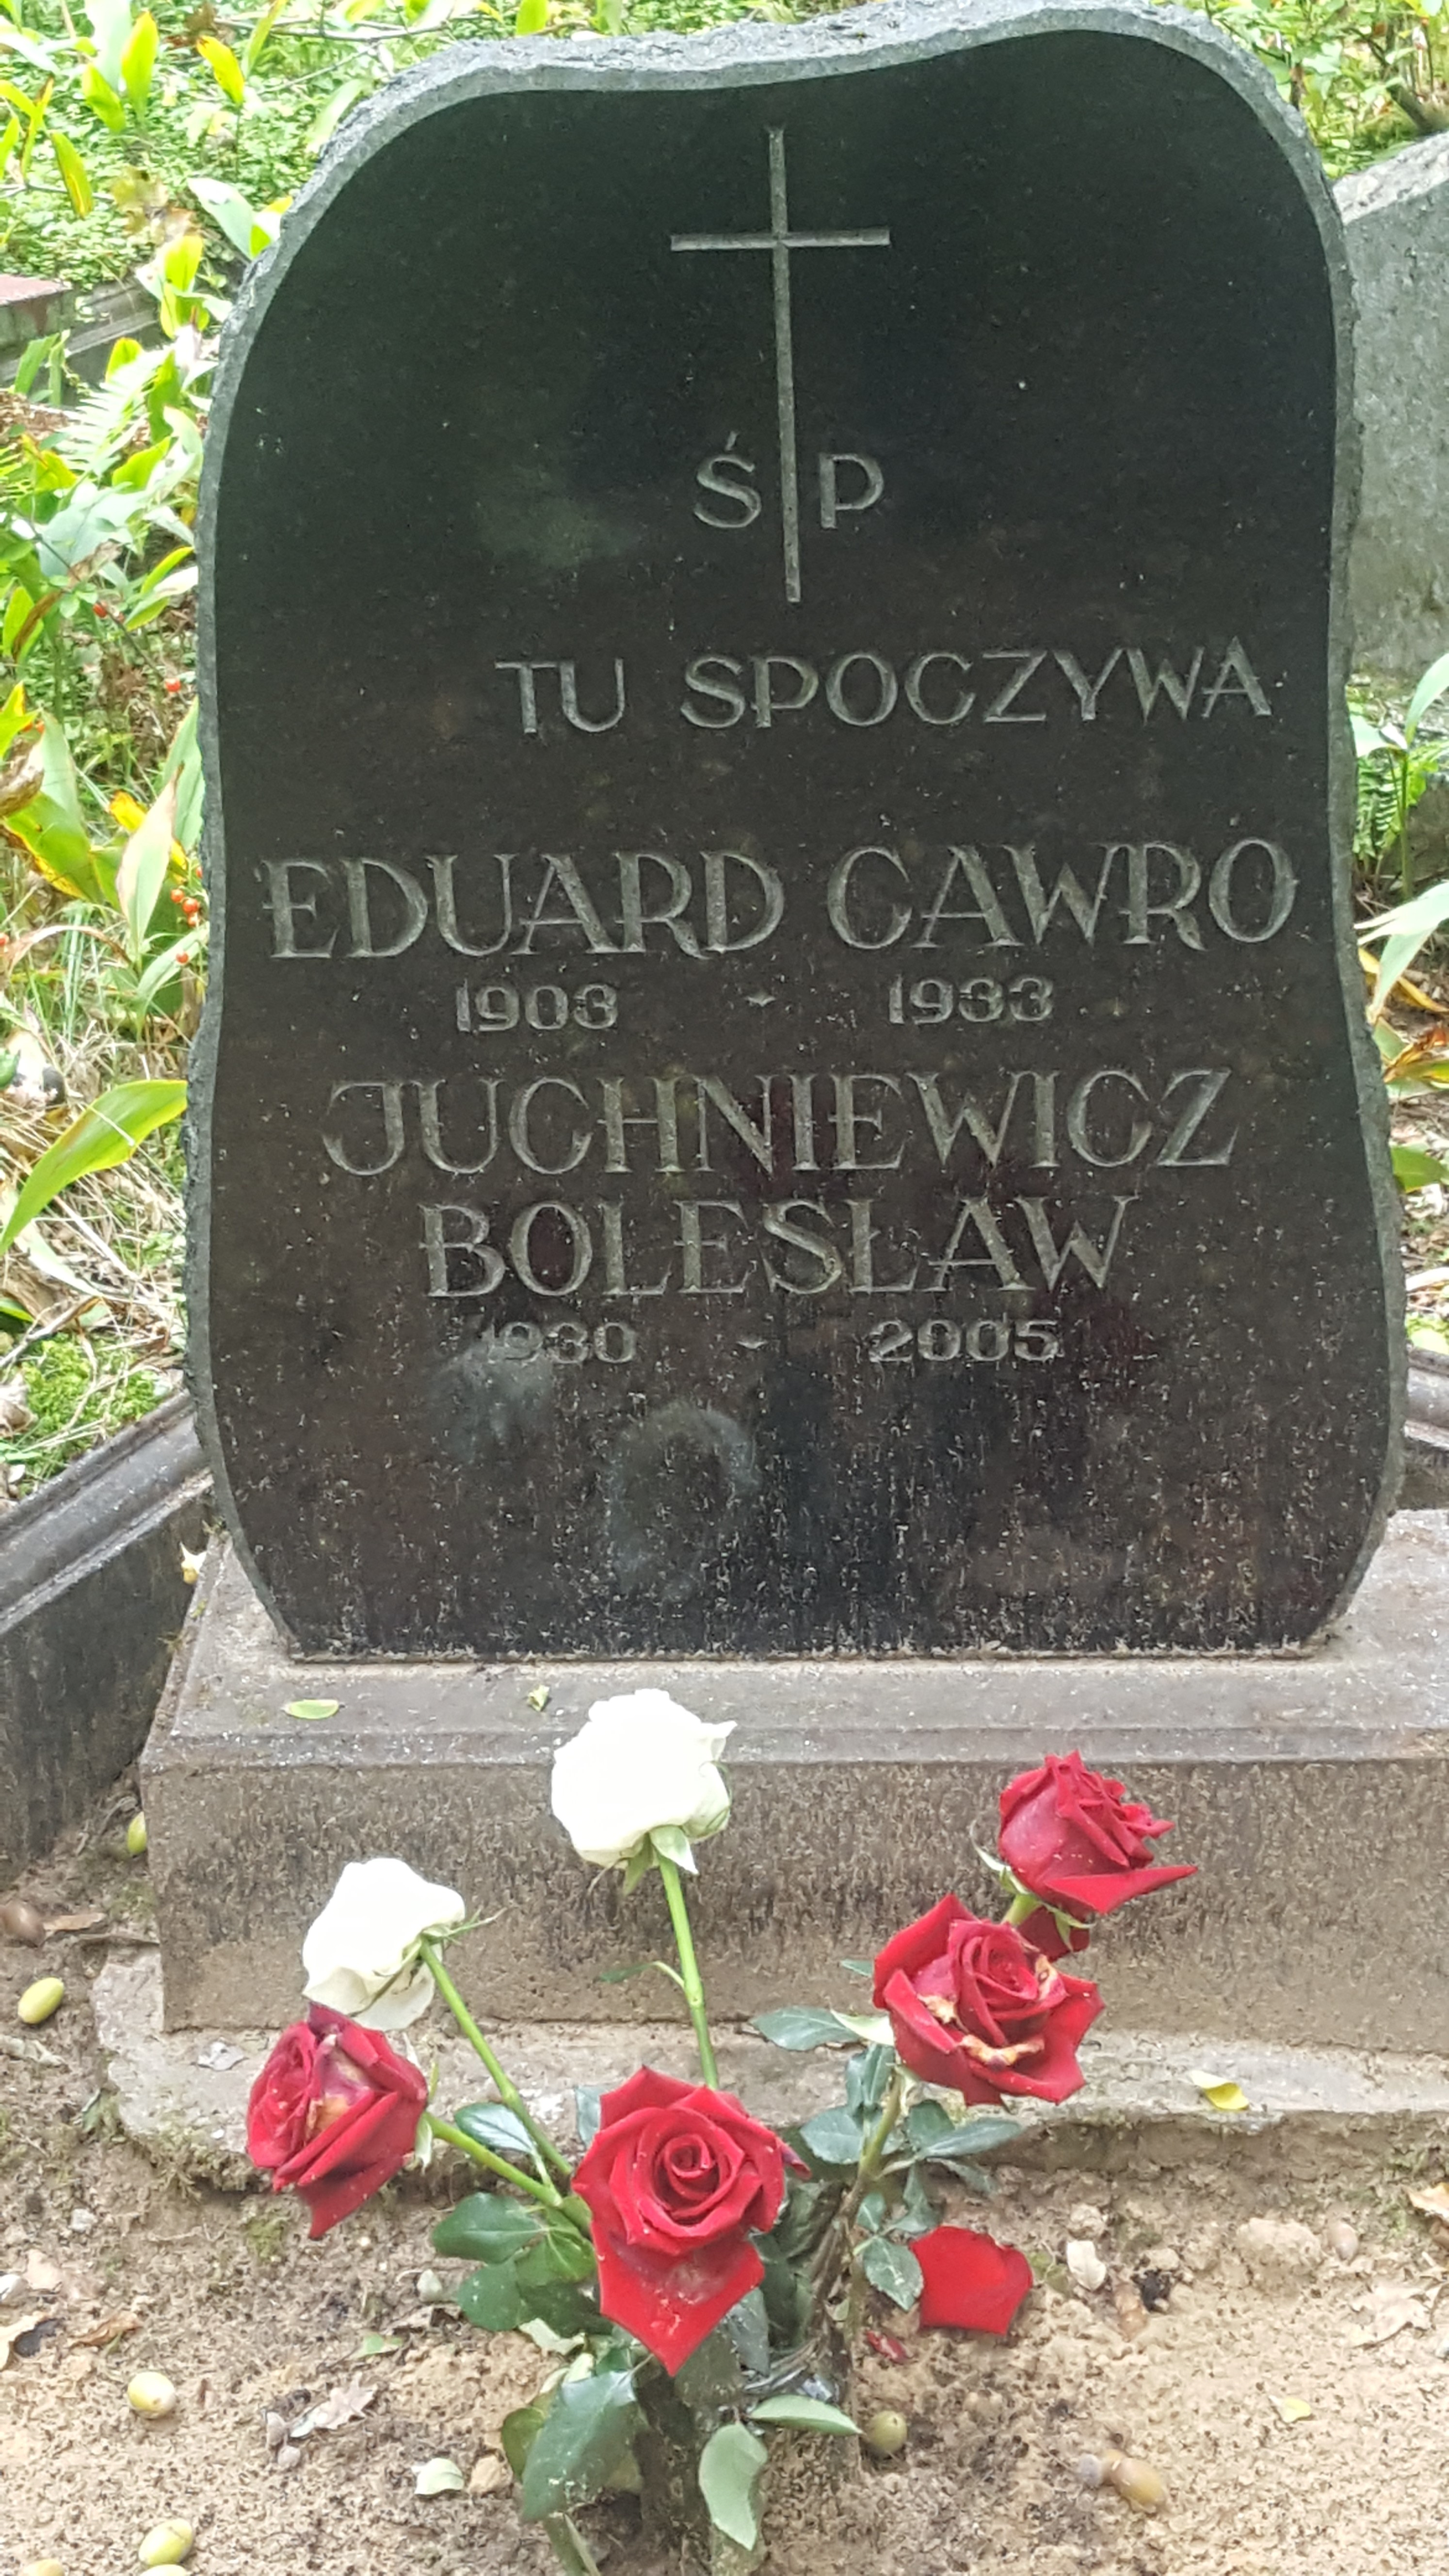 Inscription from the tombstone of Eduard Gawro and Boleslav Yuchnevich, St Michael's cemetery in Riga, as of 2021.